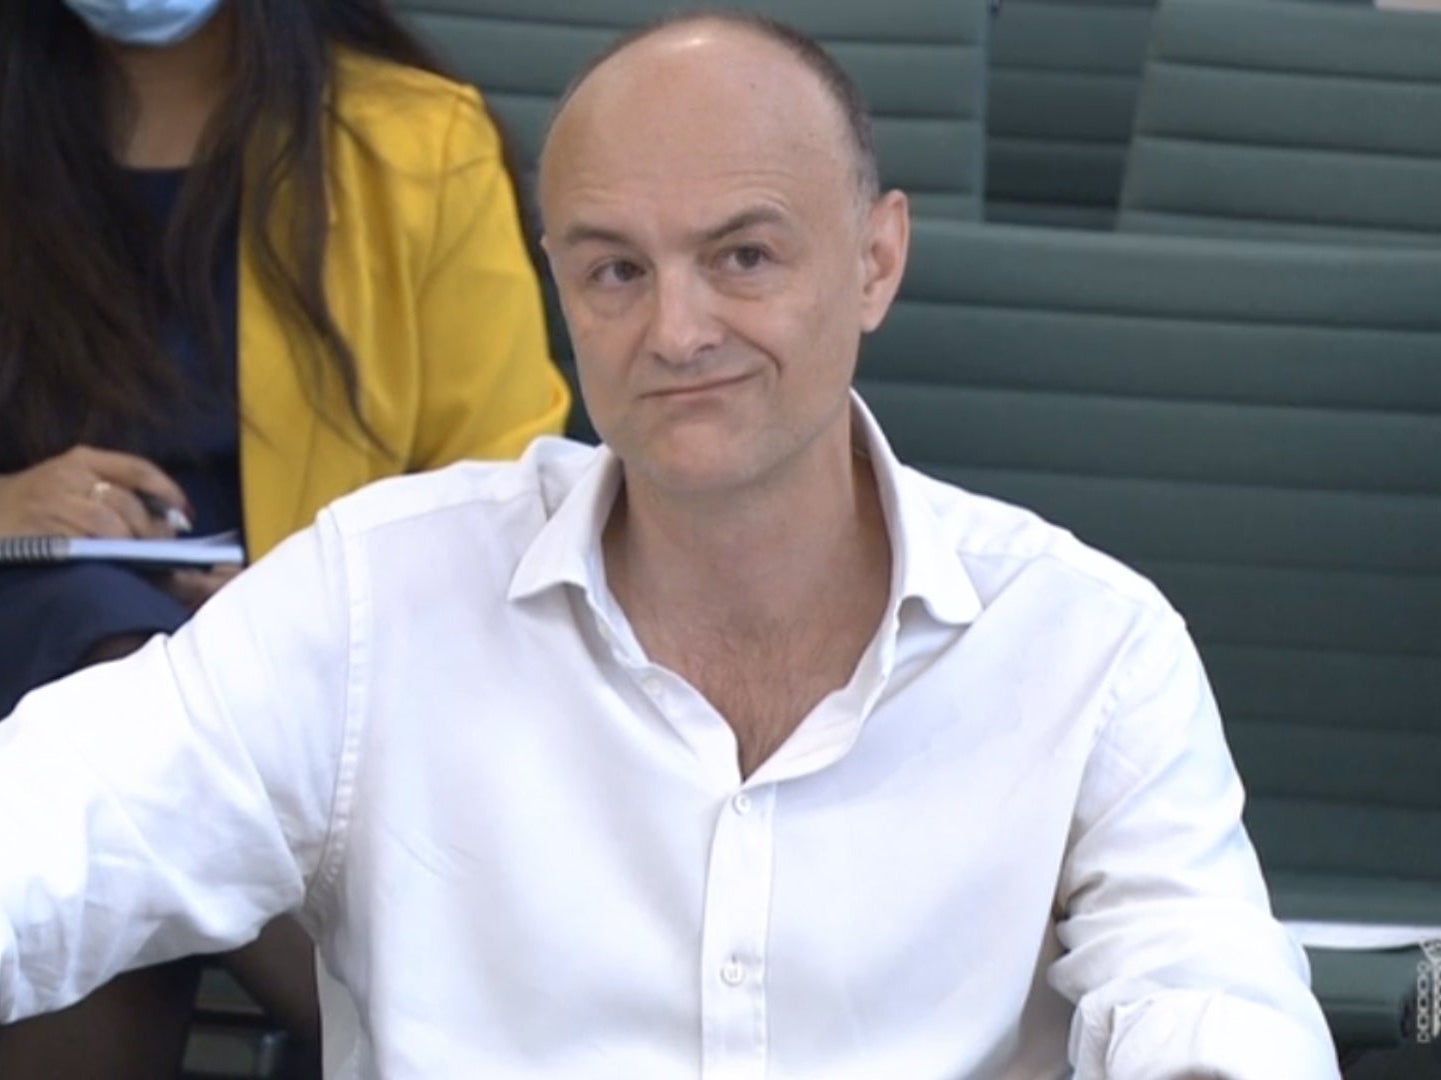 Cummings giving evidence to the joint select committee on Wednesday